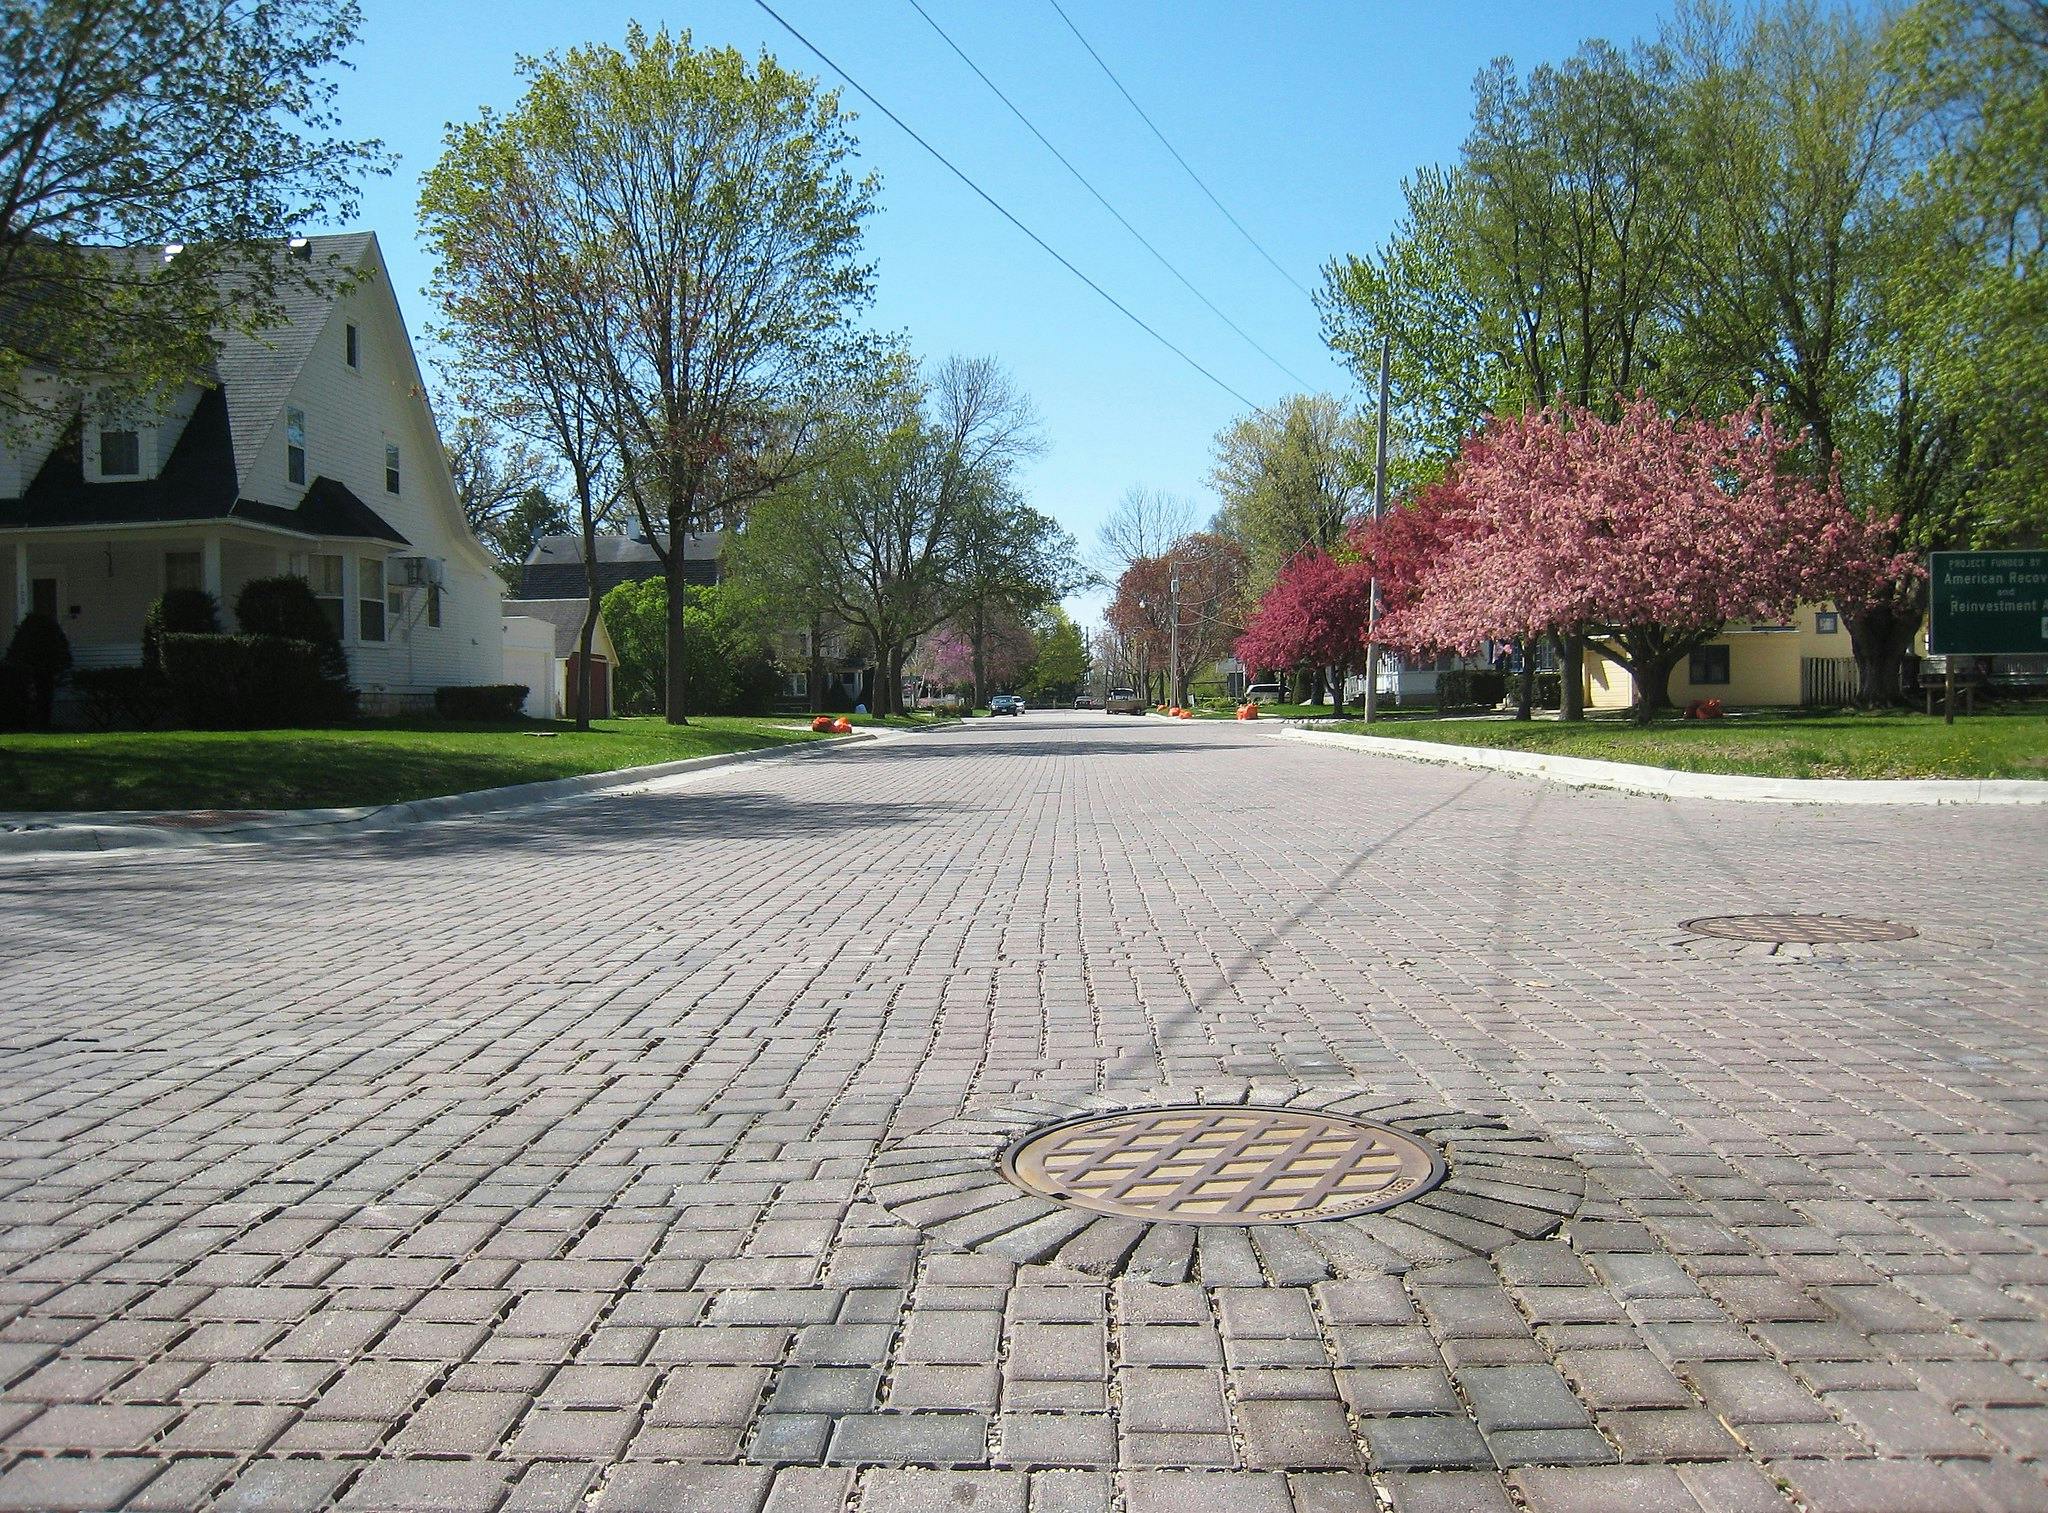 image of permeable pavement road